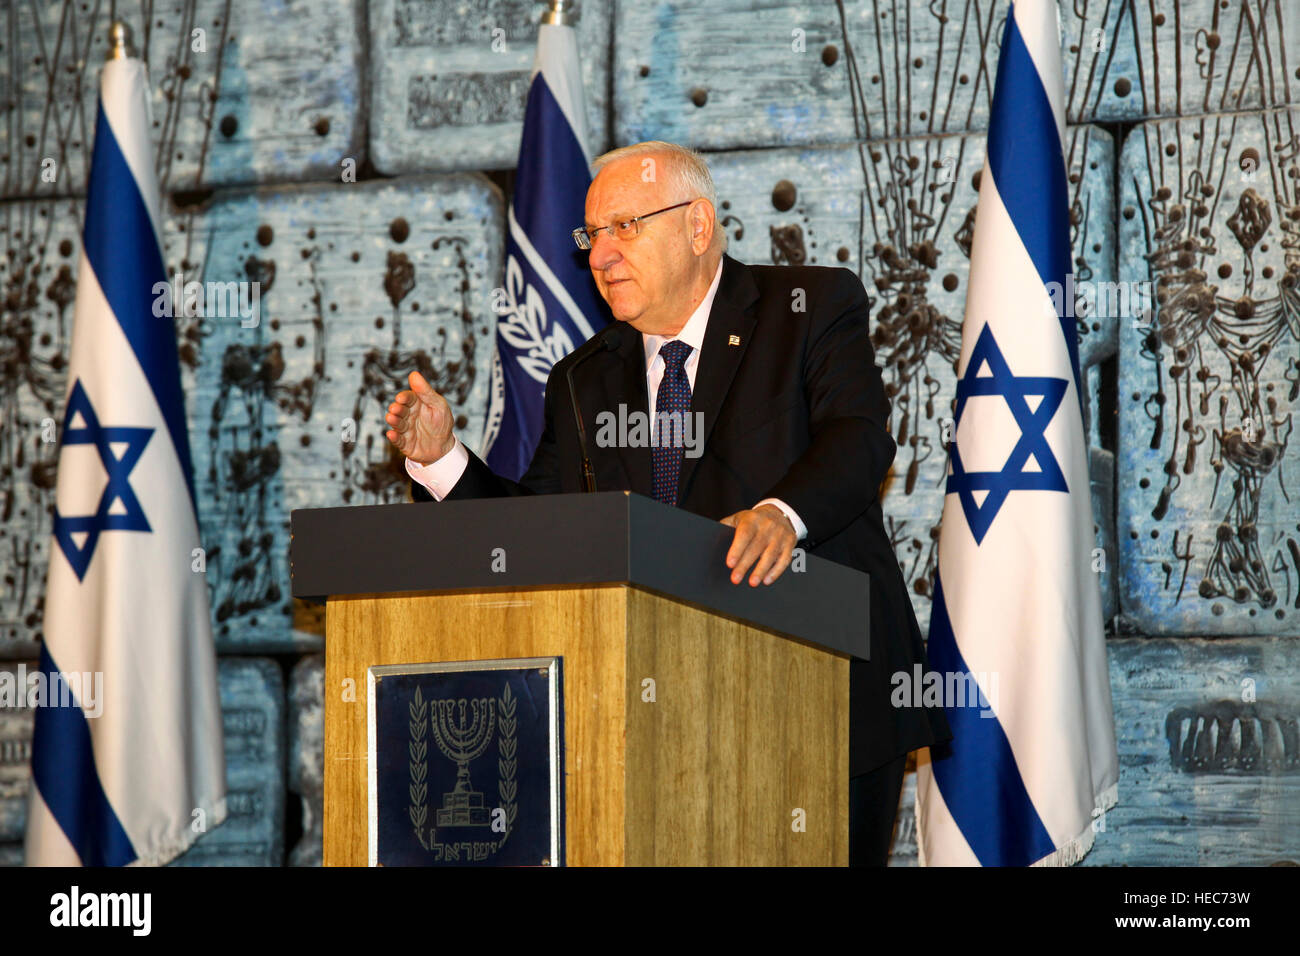 Reuven 'Rubi' Rivlin (born 9 September 1939) is an Israeli politician and lawyer who is the 10th President of Israel since 2014. Photographed on Augus Stock Photo